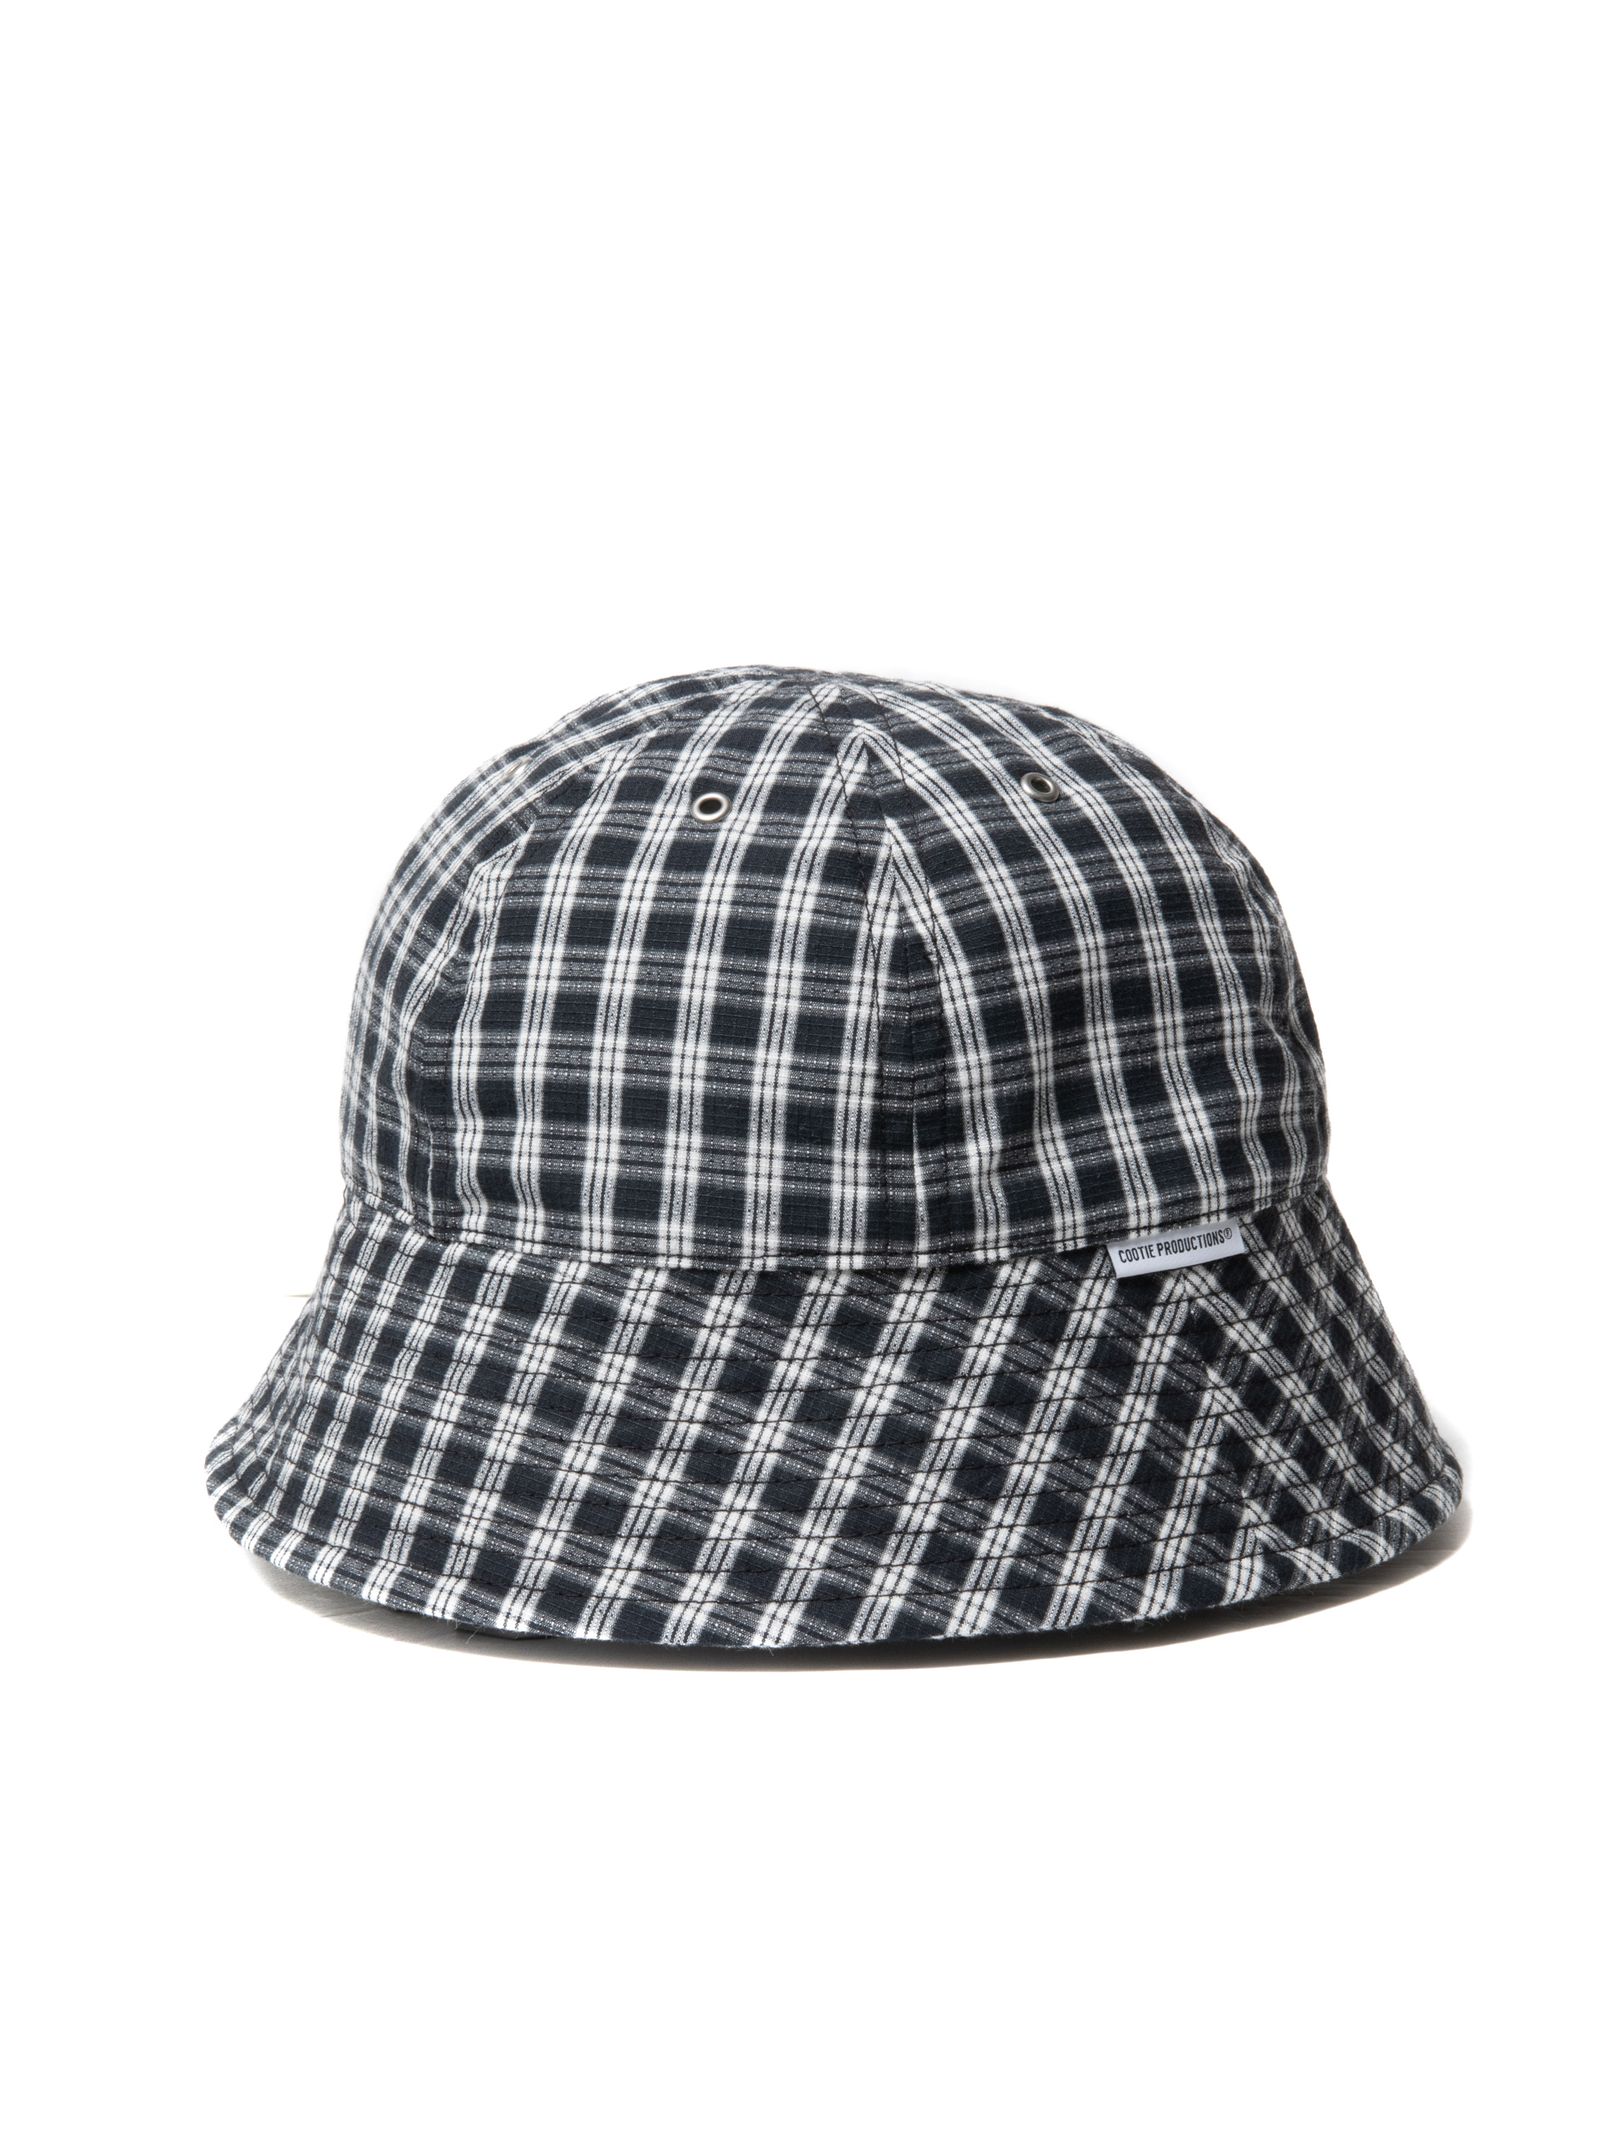 COOTIE PRODUCTIONS - Dobby Check Ball Hat (BLACK) / ドビーチェック 